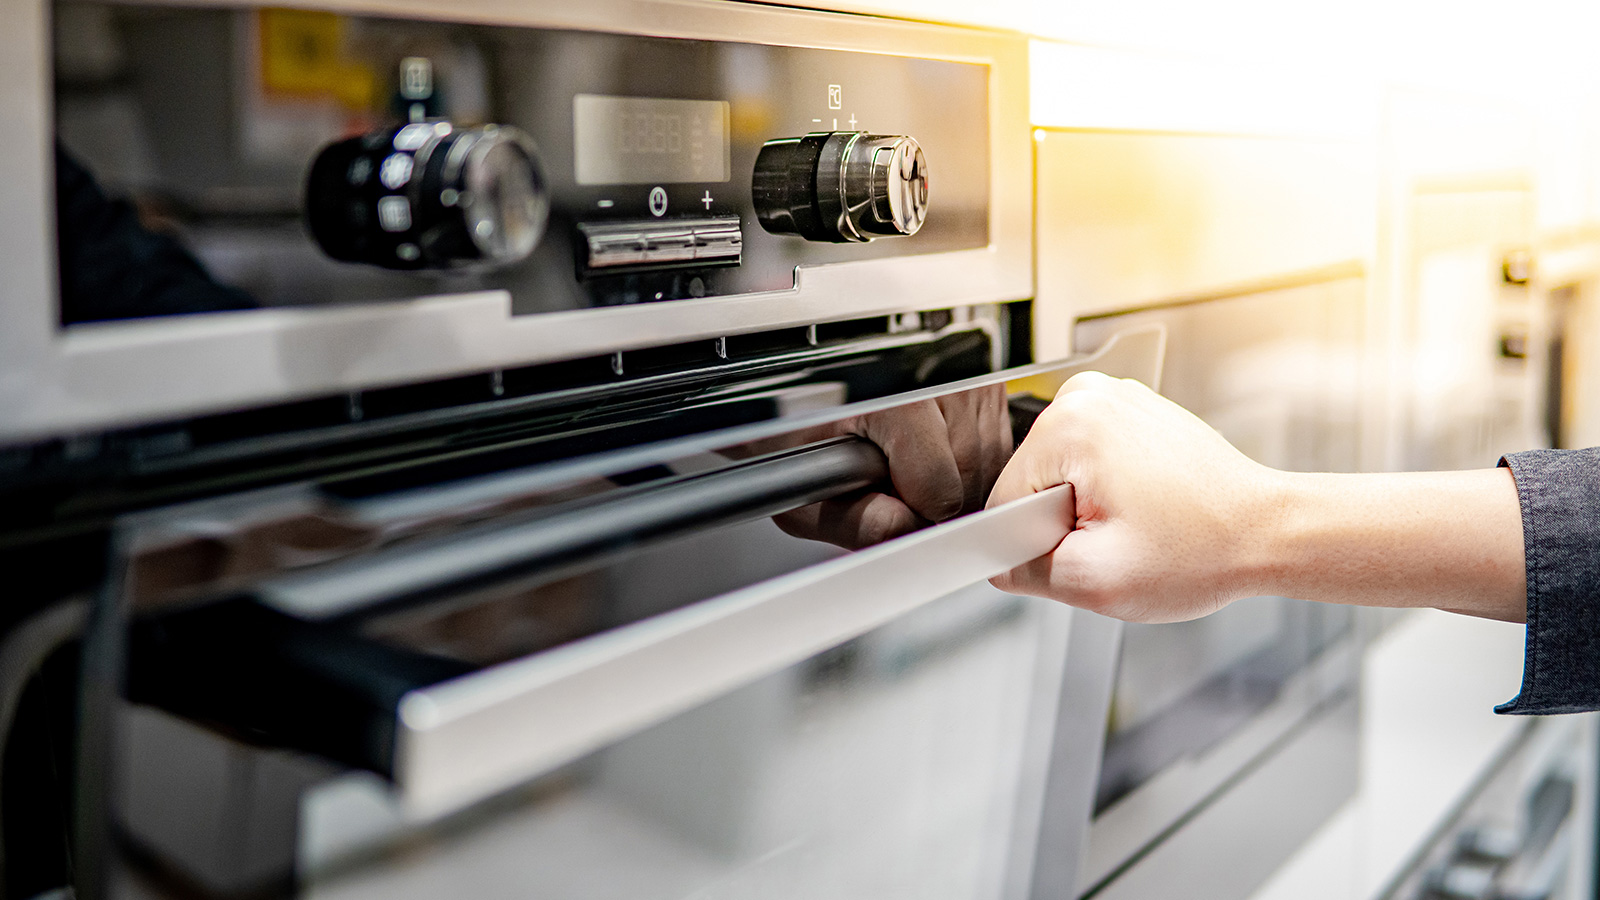 5 Common Reasons Why Your Oven isn’t Working